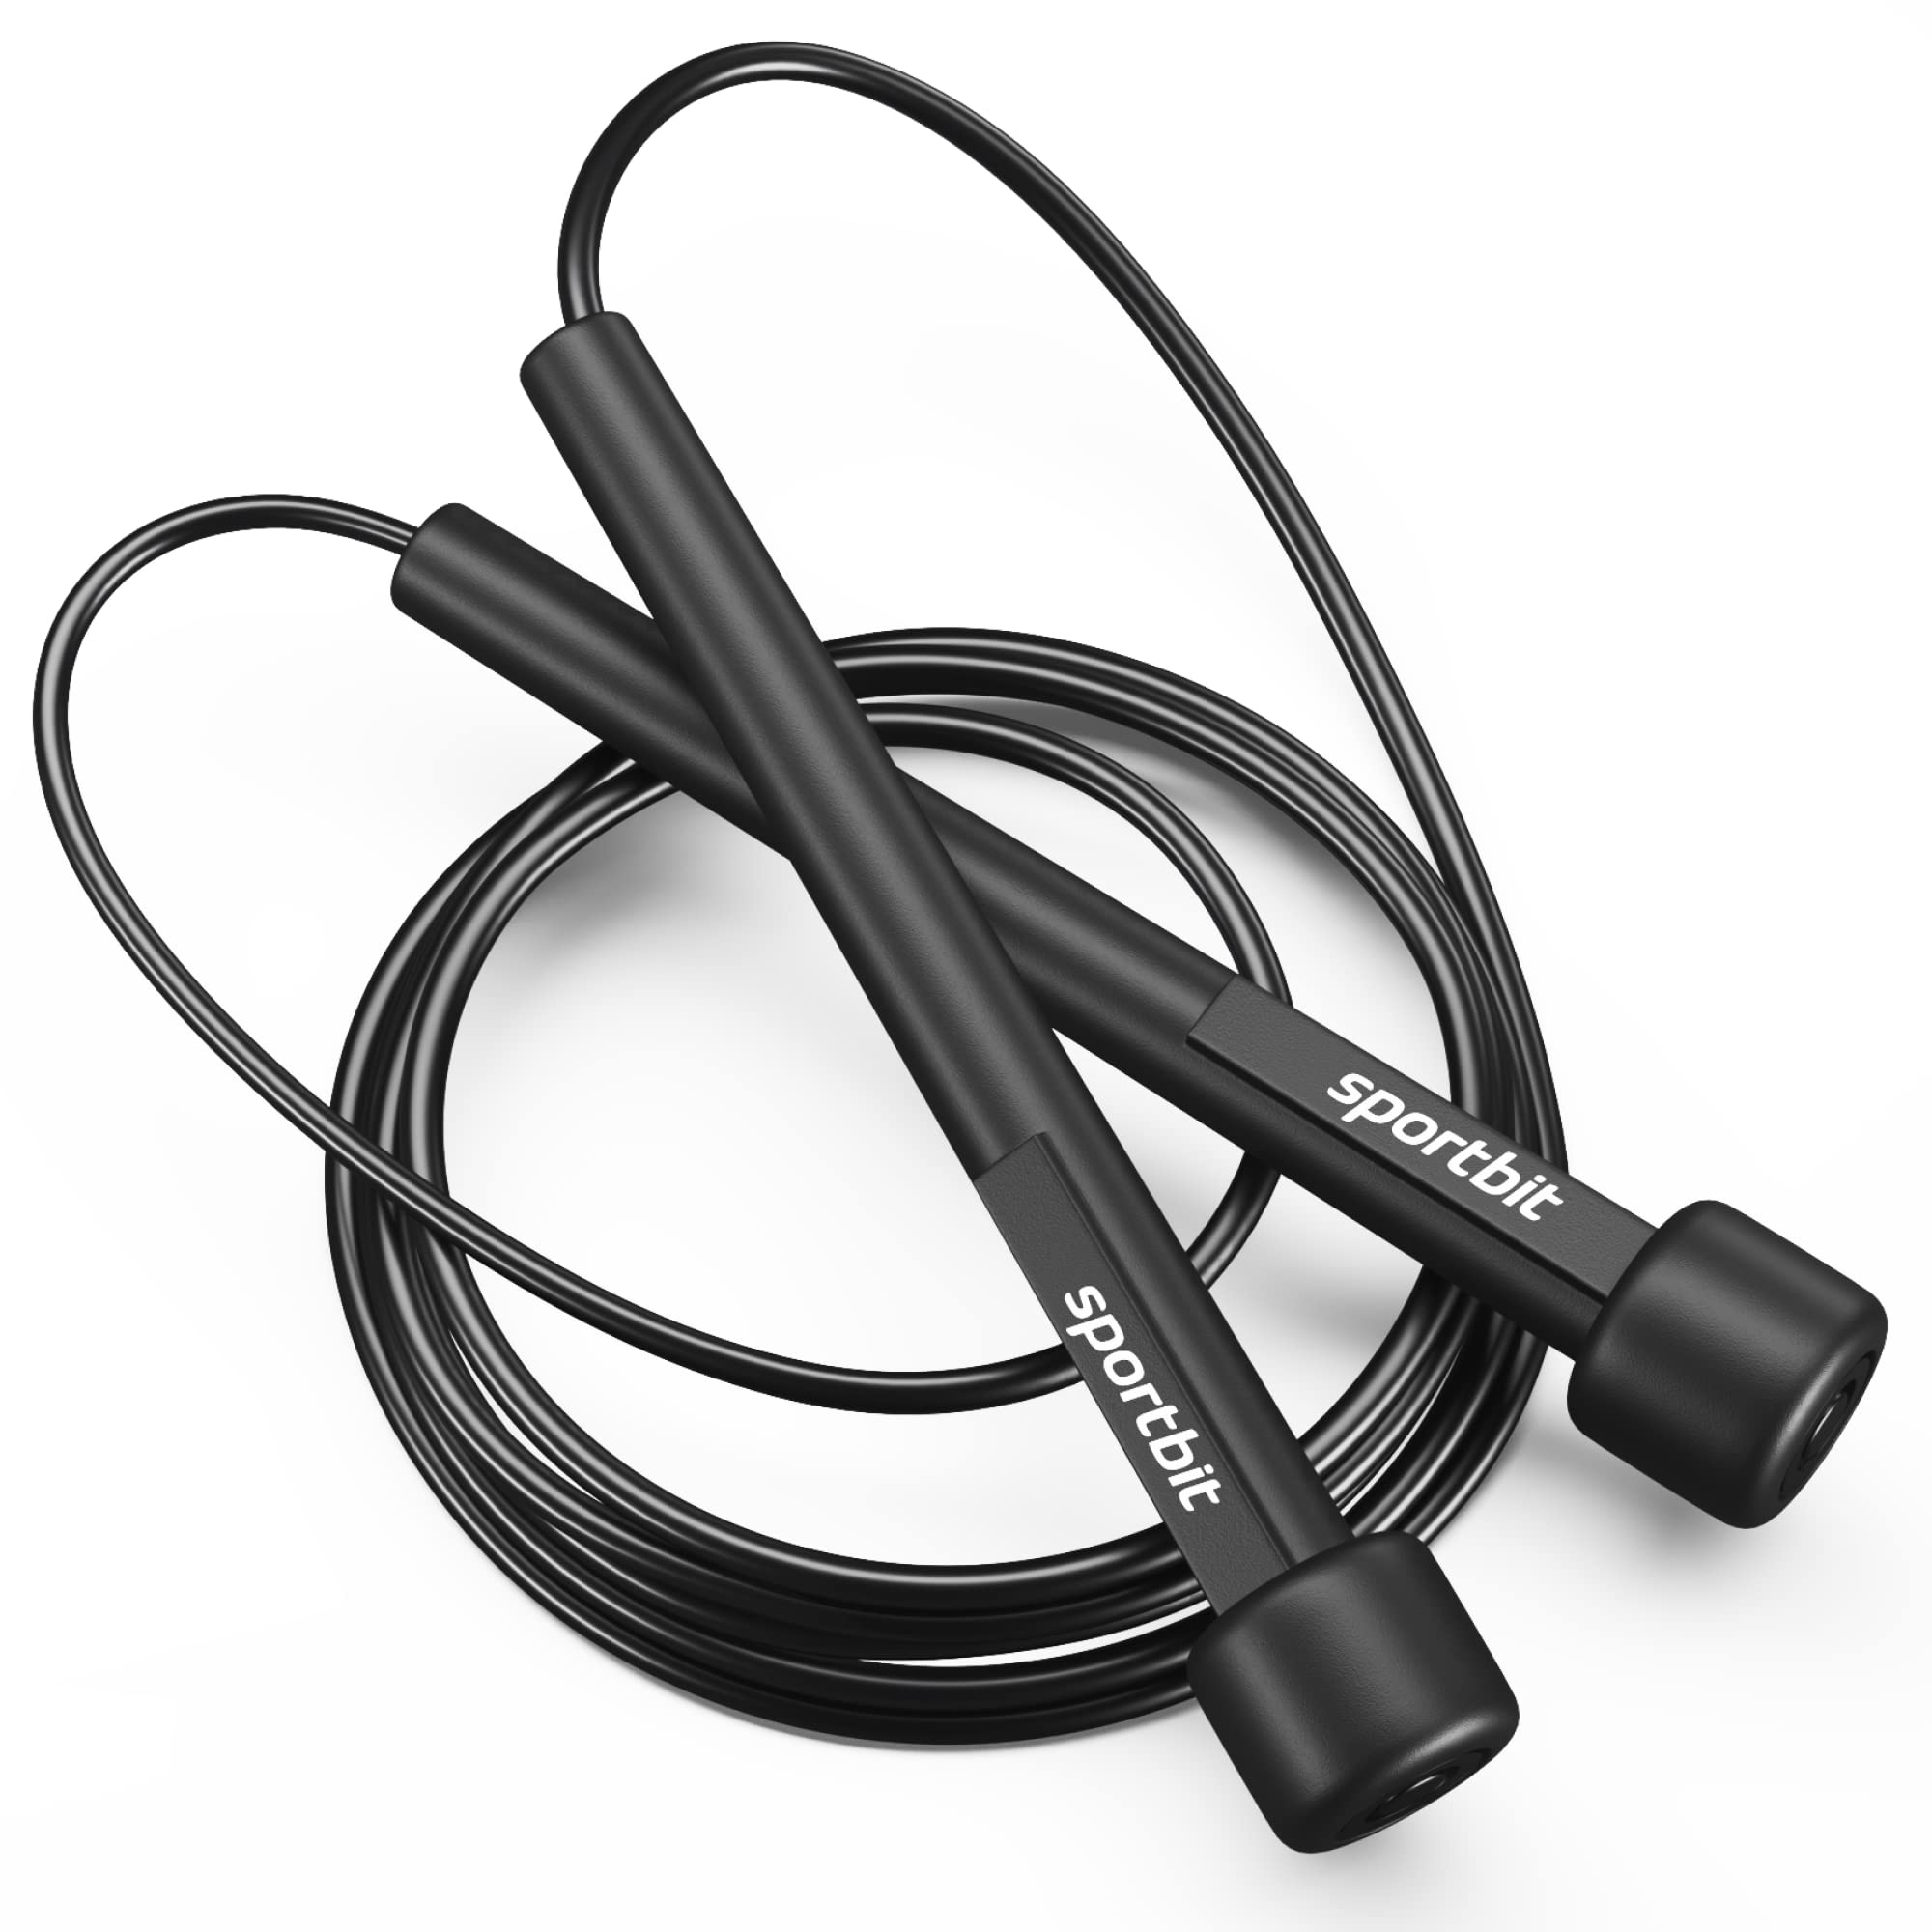  Jump Rope, Digital Weighted Handle Workout Jumping Rope with  Calorie Counter for Training Fitness, Adjustable Exercise Speed Skipping  Rope for Men, Women, Kids, Girls (Black) : Sports & Outdoors